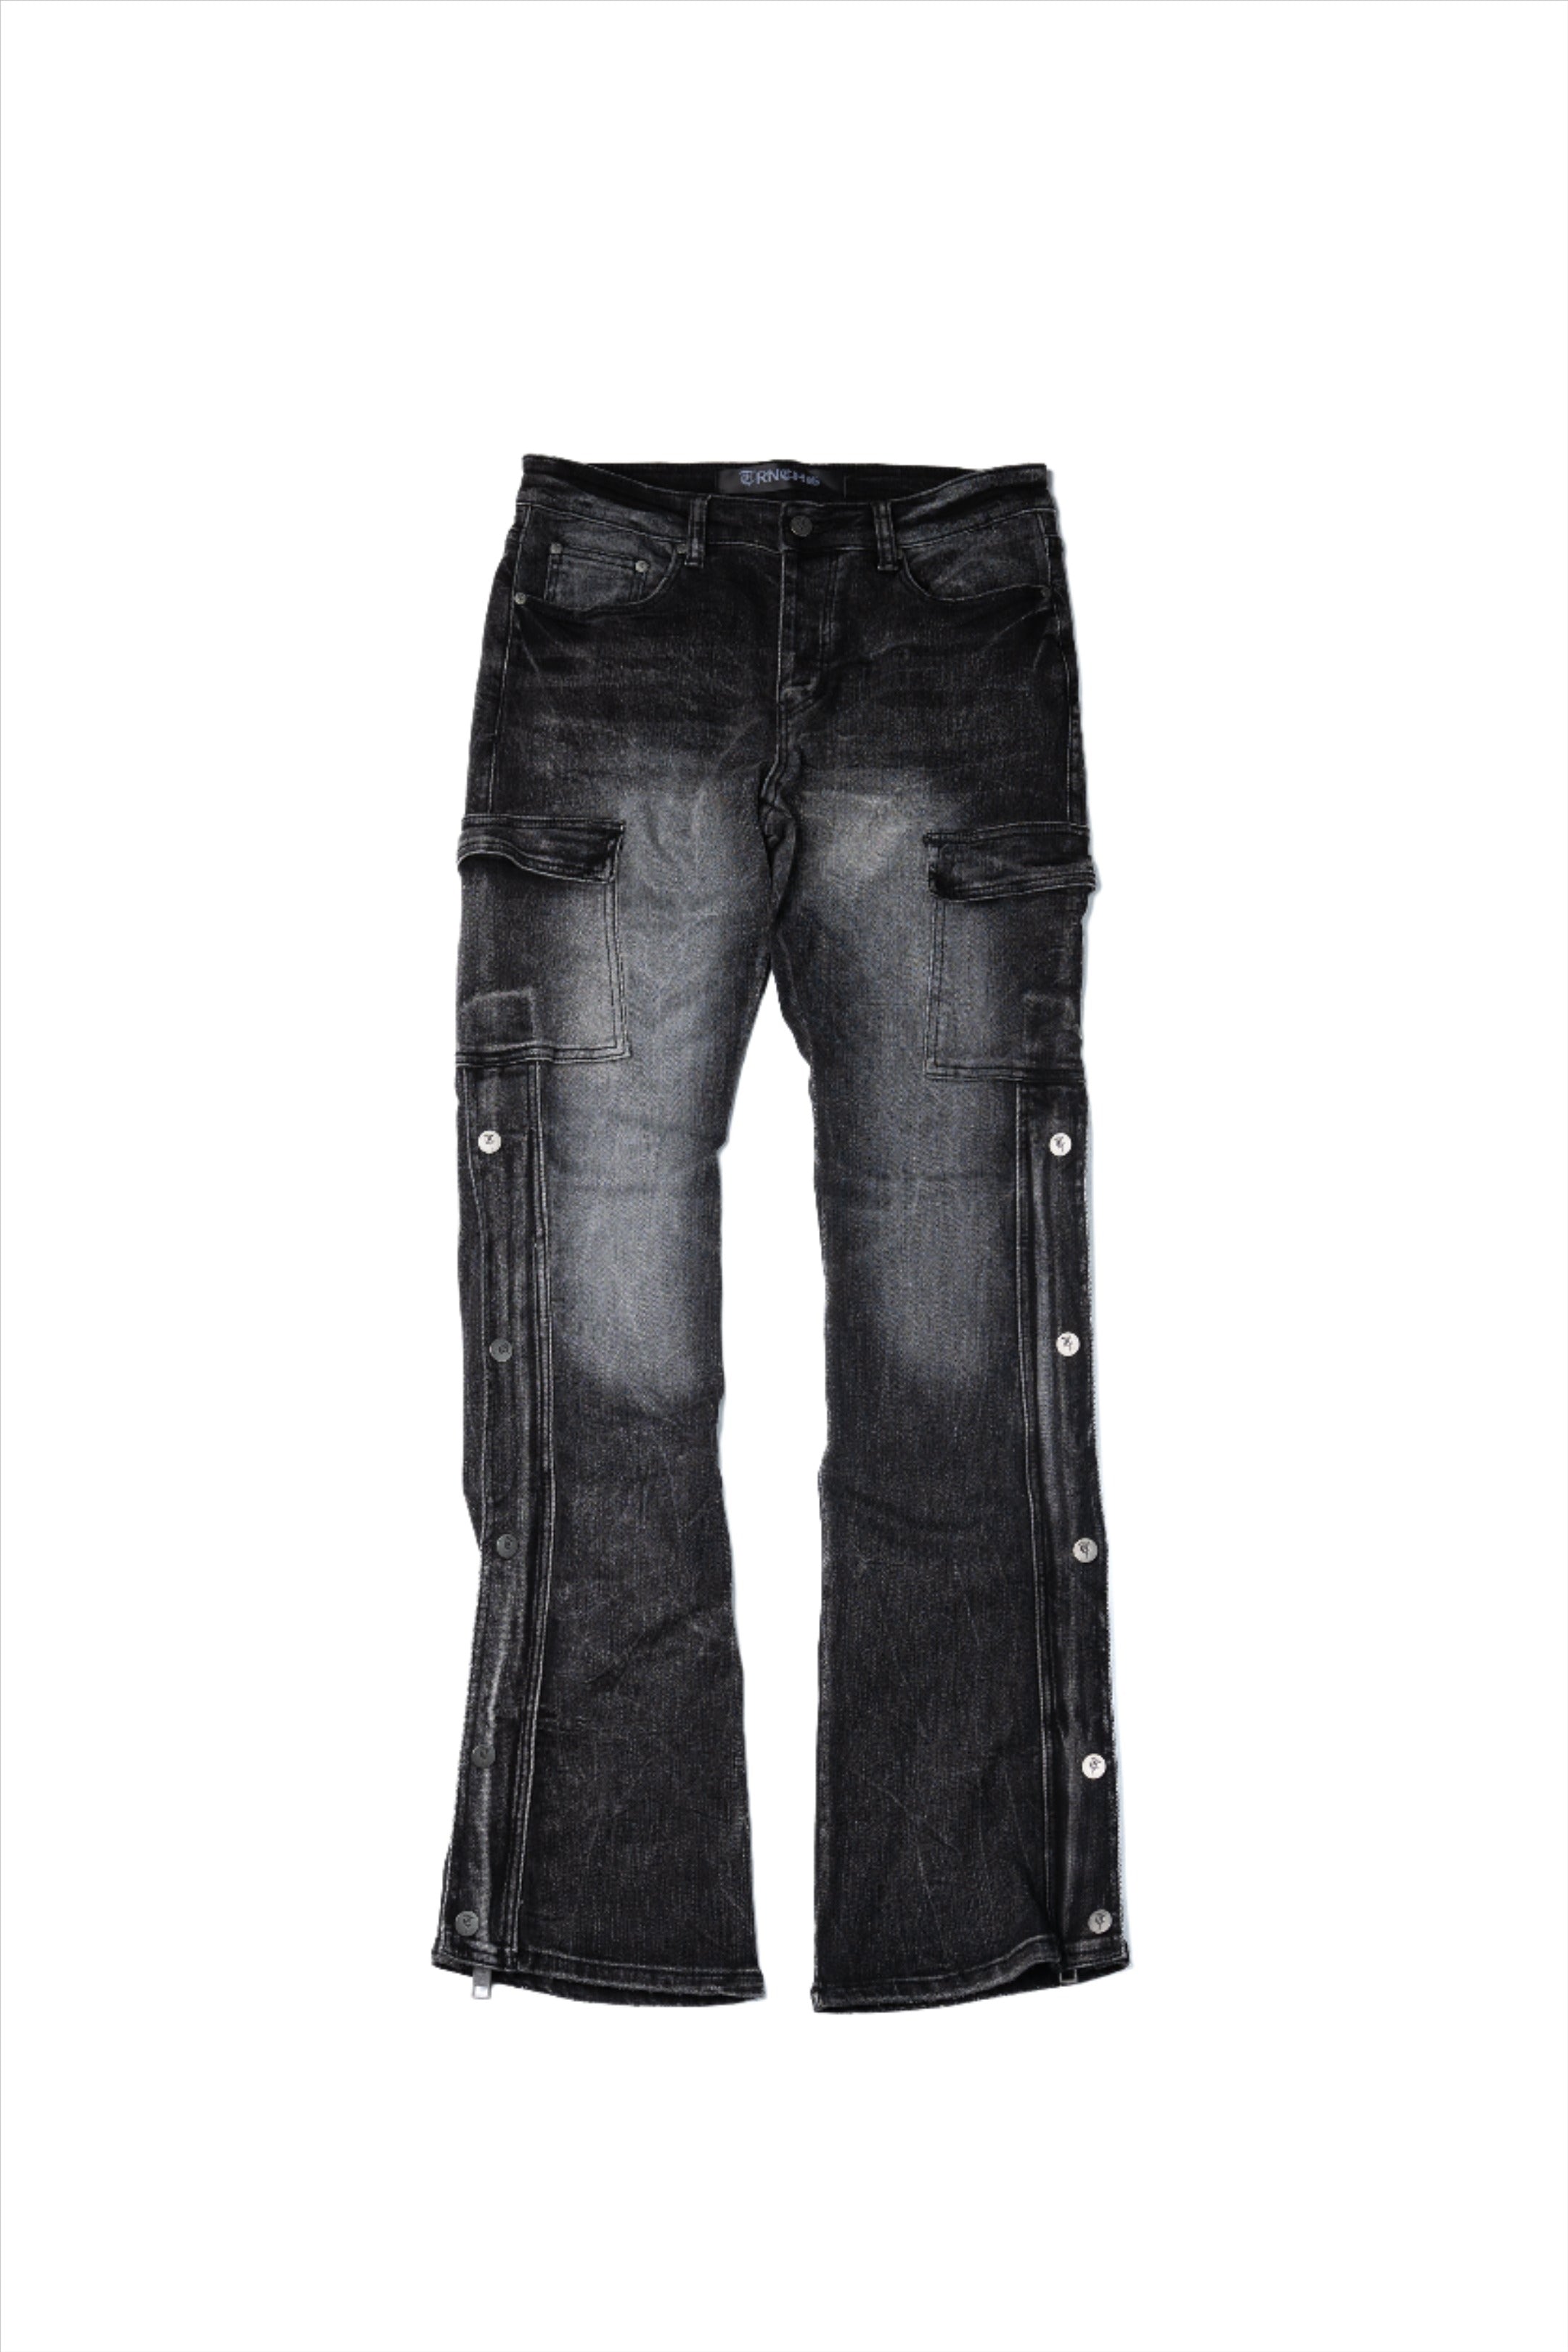 "SNAP" Black Grey Wash Stacked Jeans